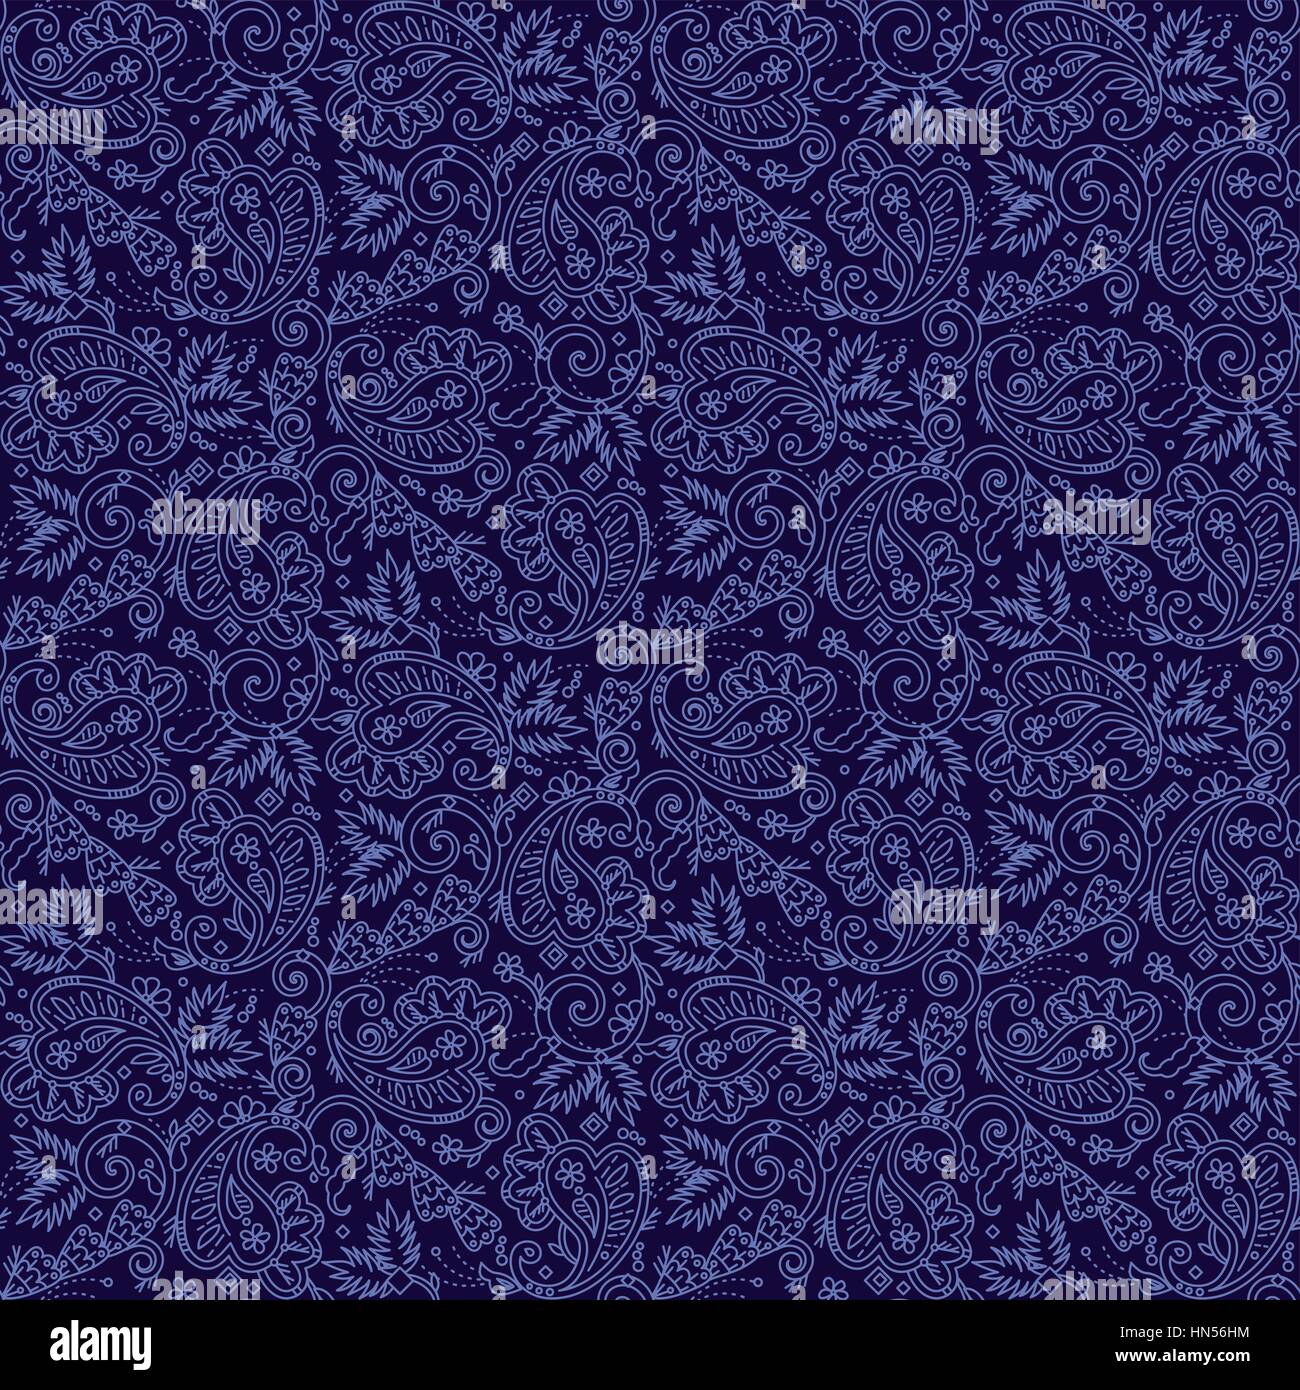 Seamless (you see 4 tiles) paisley pattern background (swatch, wallpaper, print, texture) of dark blue night colors. Vector and high res JPEG. Stock Vector